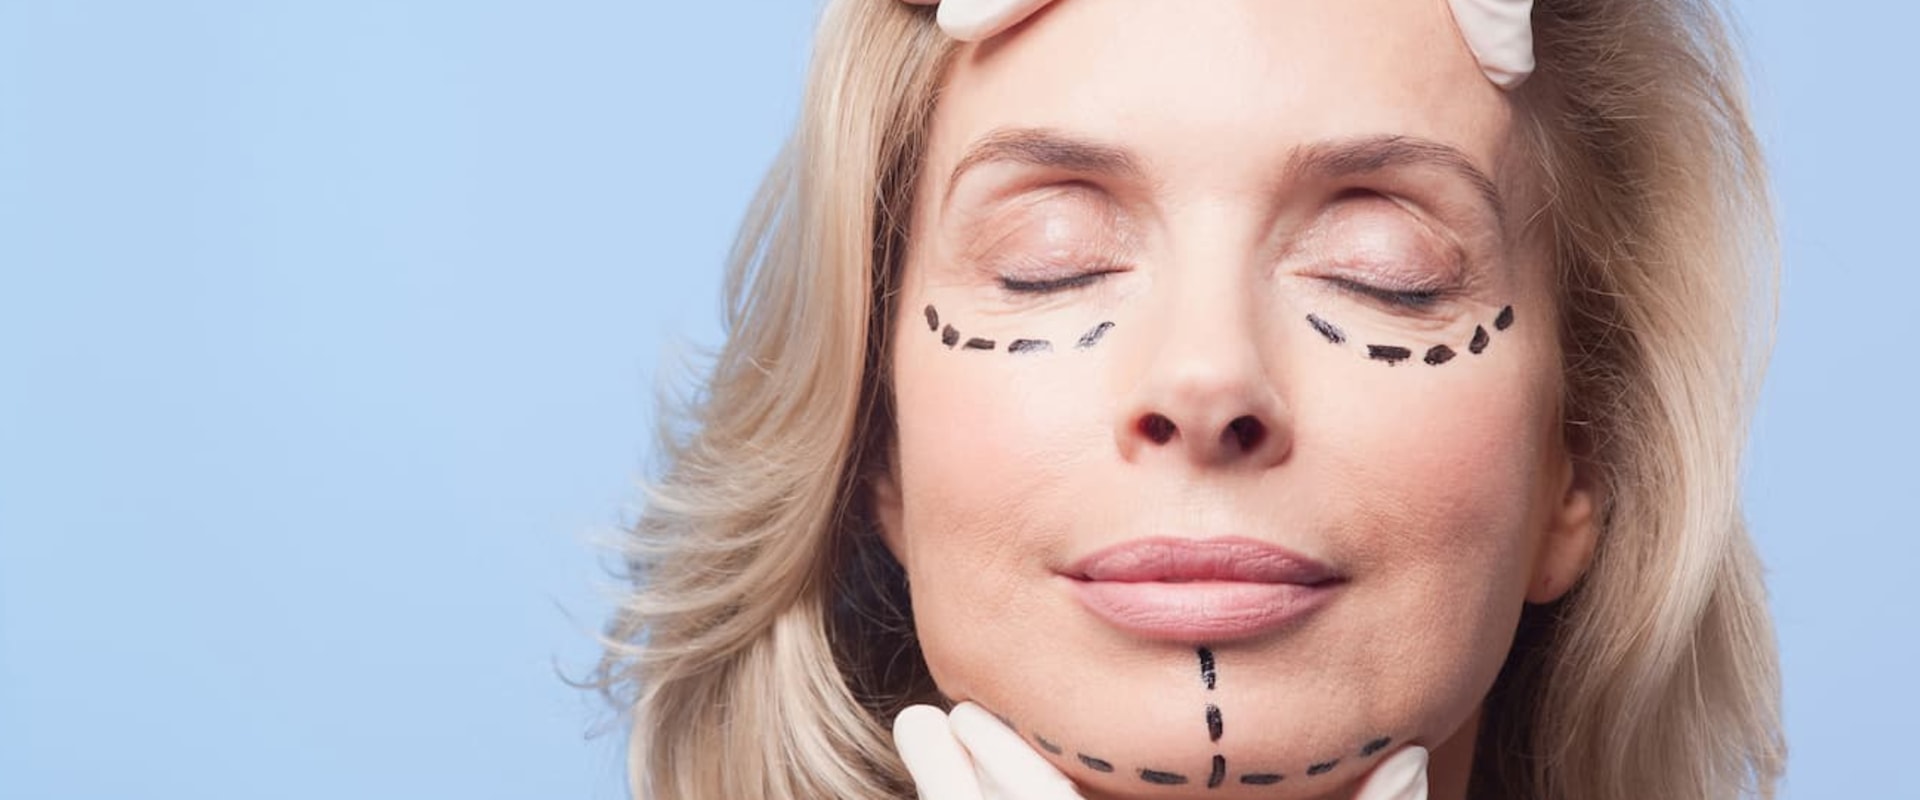 Can cosmetic surgery be claimed on taxes?